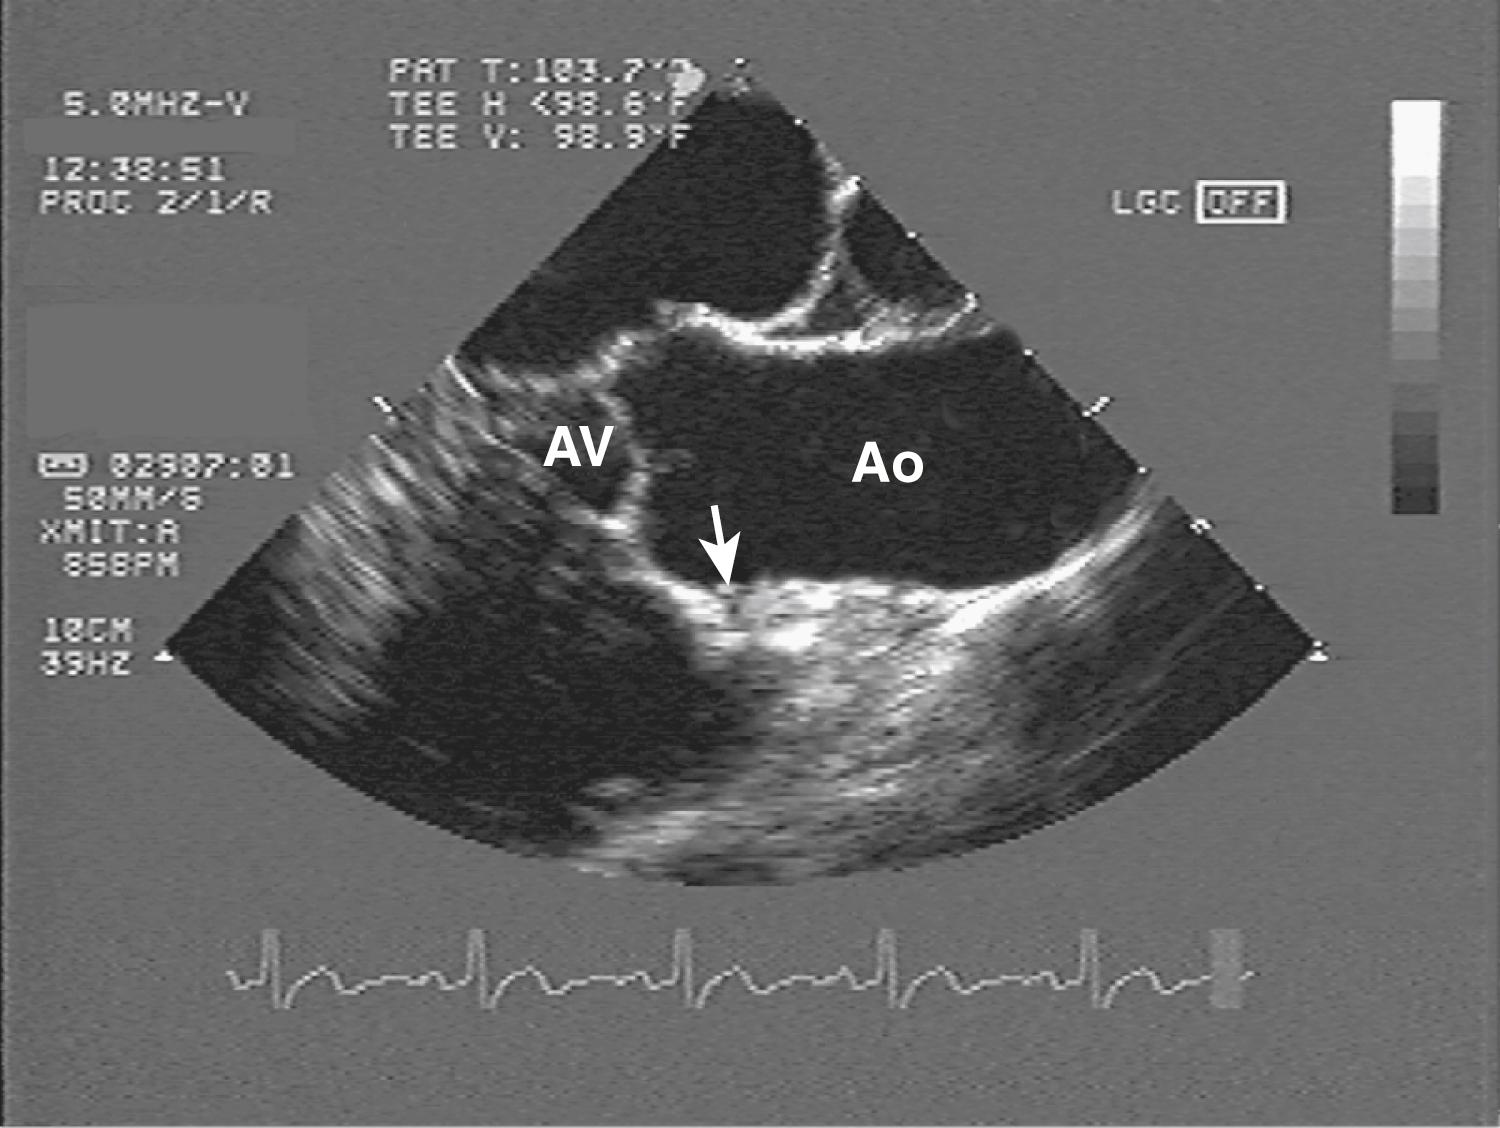 Fig. 33.1, Longitudinal view of the ascending aorta (AO) by transesophageal echocardiography. The entire ascending aorta is visualized, from the aortic valve (AV) to the initial curvature of the aortic arch. The take-off of the right coronary artery is visible (arrow) .